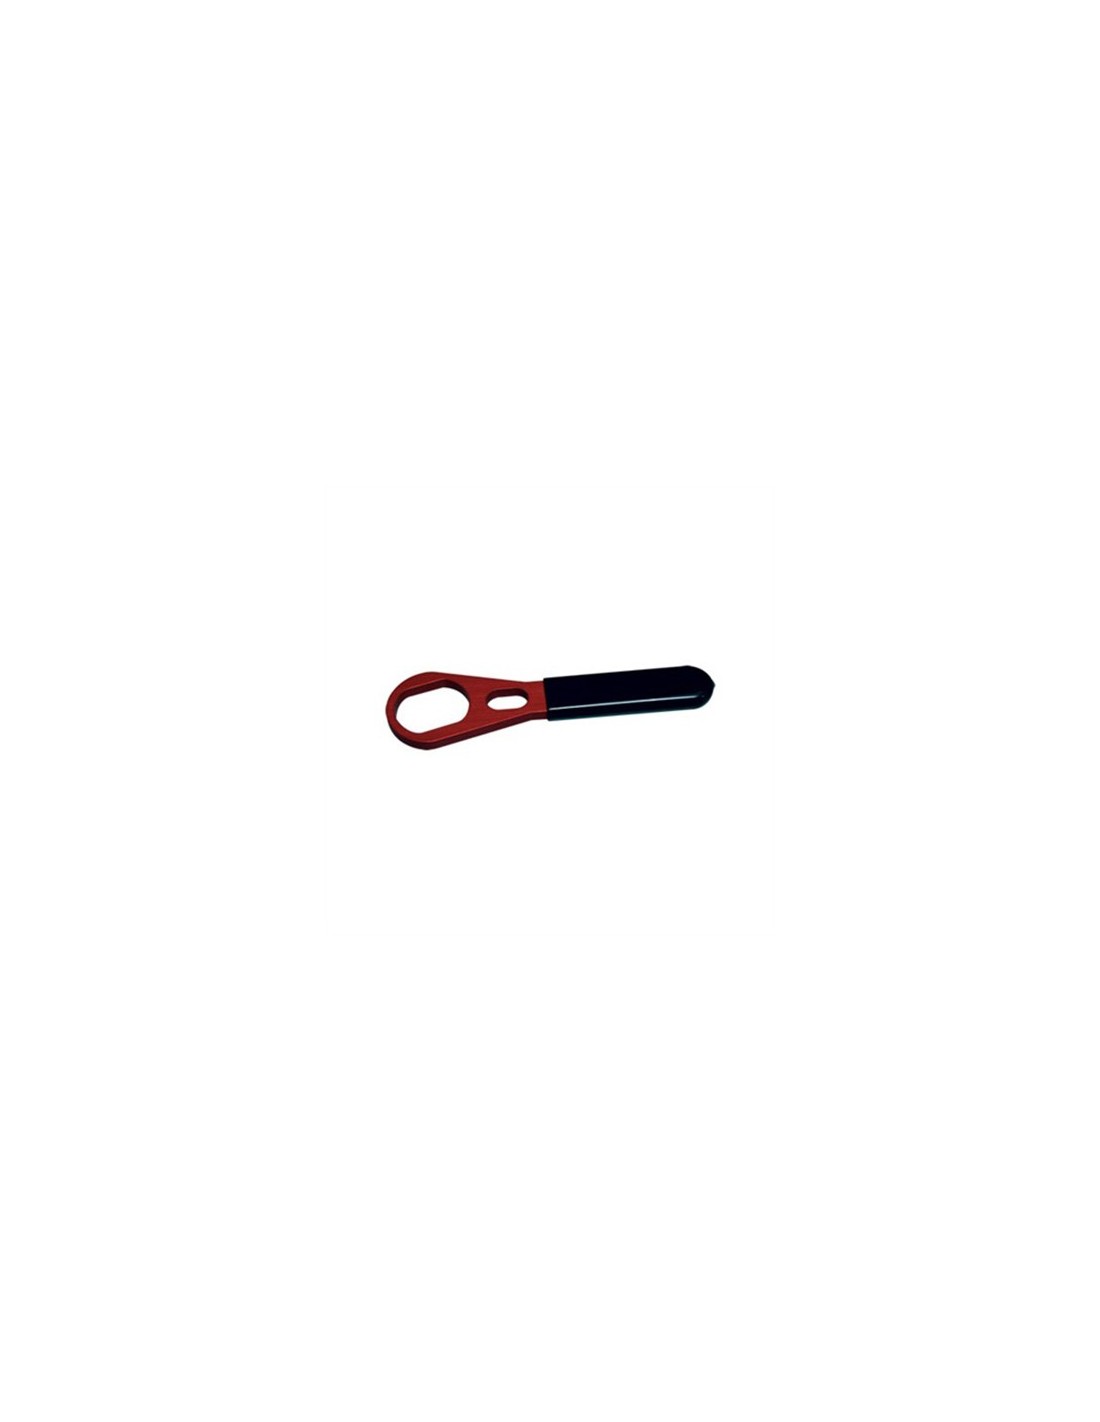 SINCLAIR HORNADY/LEE LOCK RING WRENCH